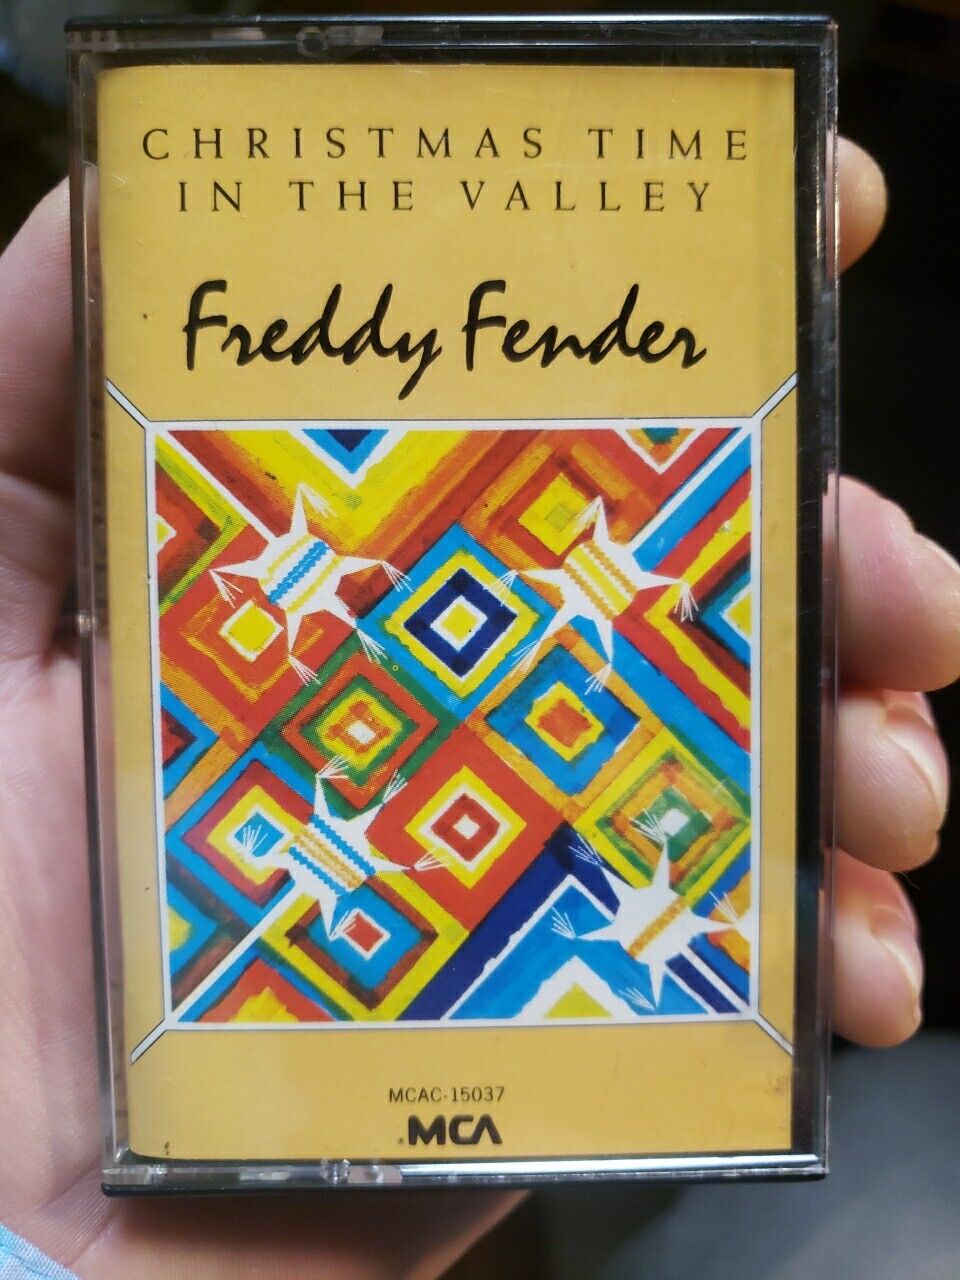 1977 Freddy Fender Christmas Time In The Valley Cassette MCA Records